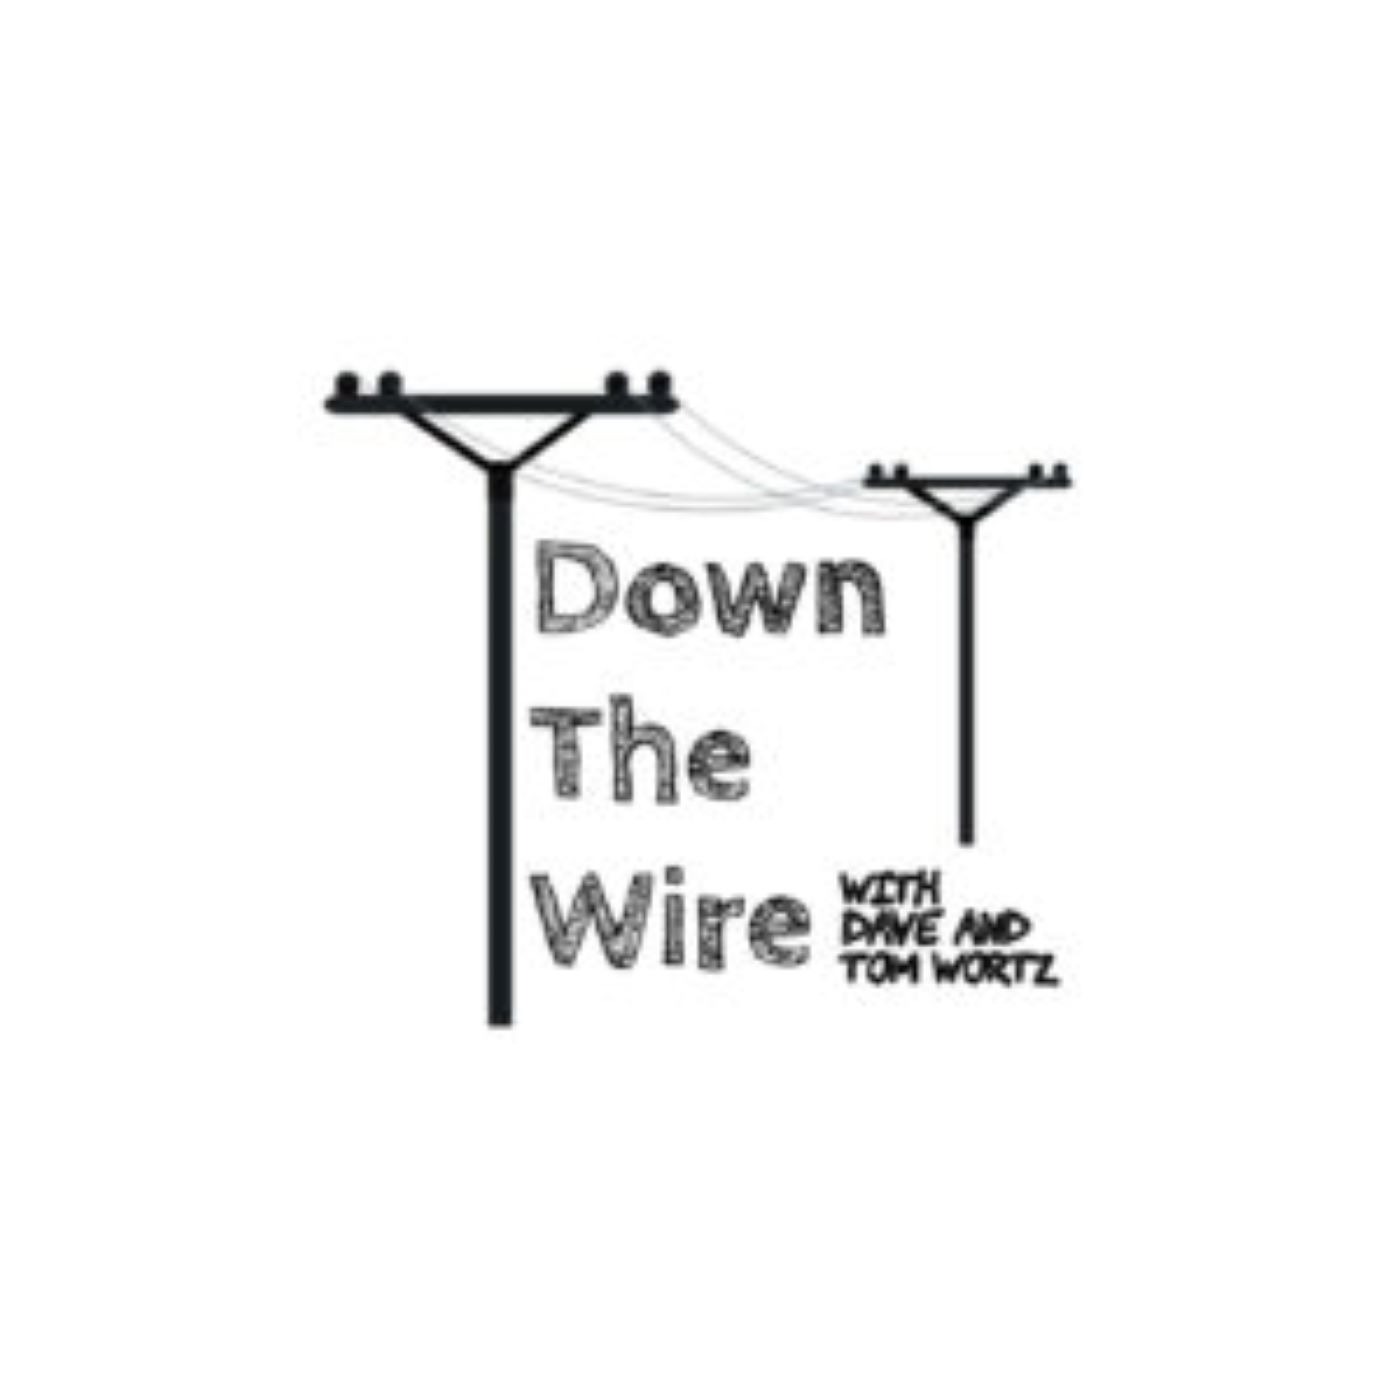 Down the Wire: The Last Week of Football is Here!